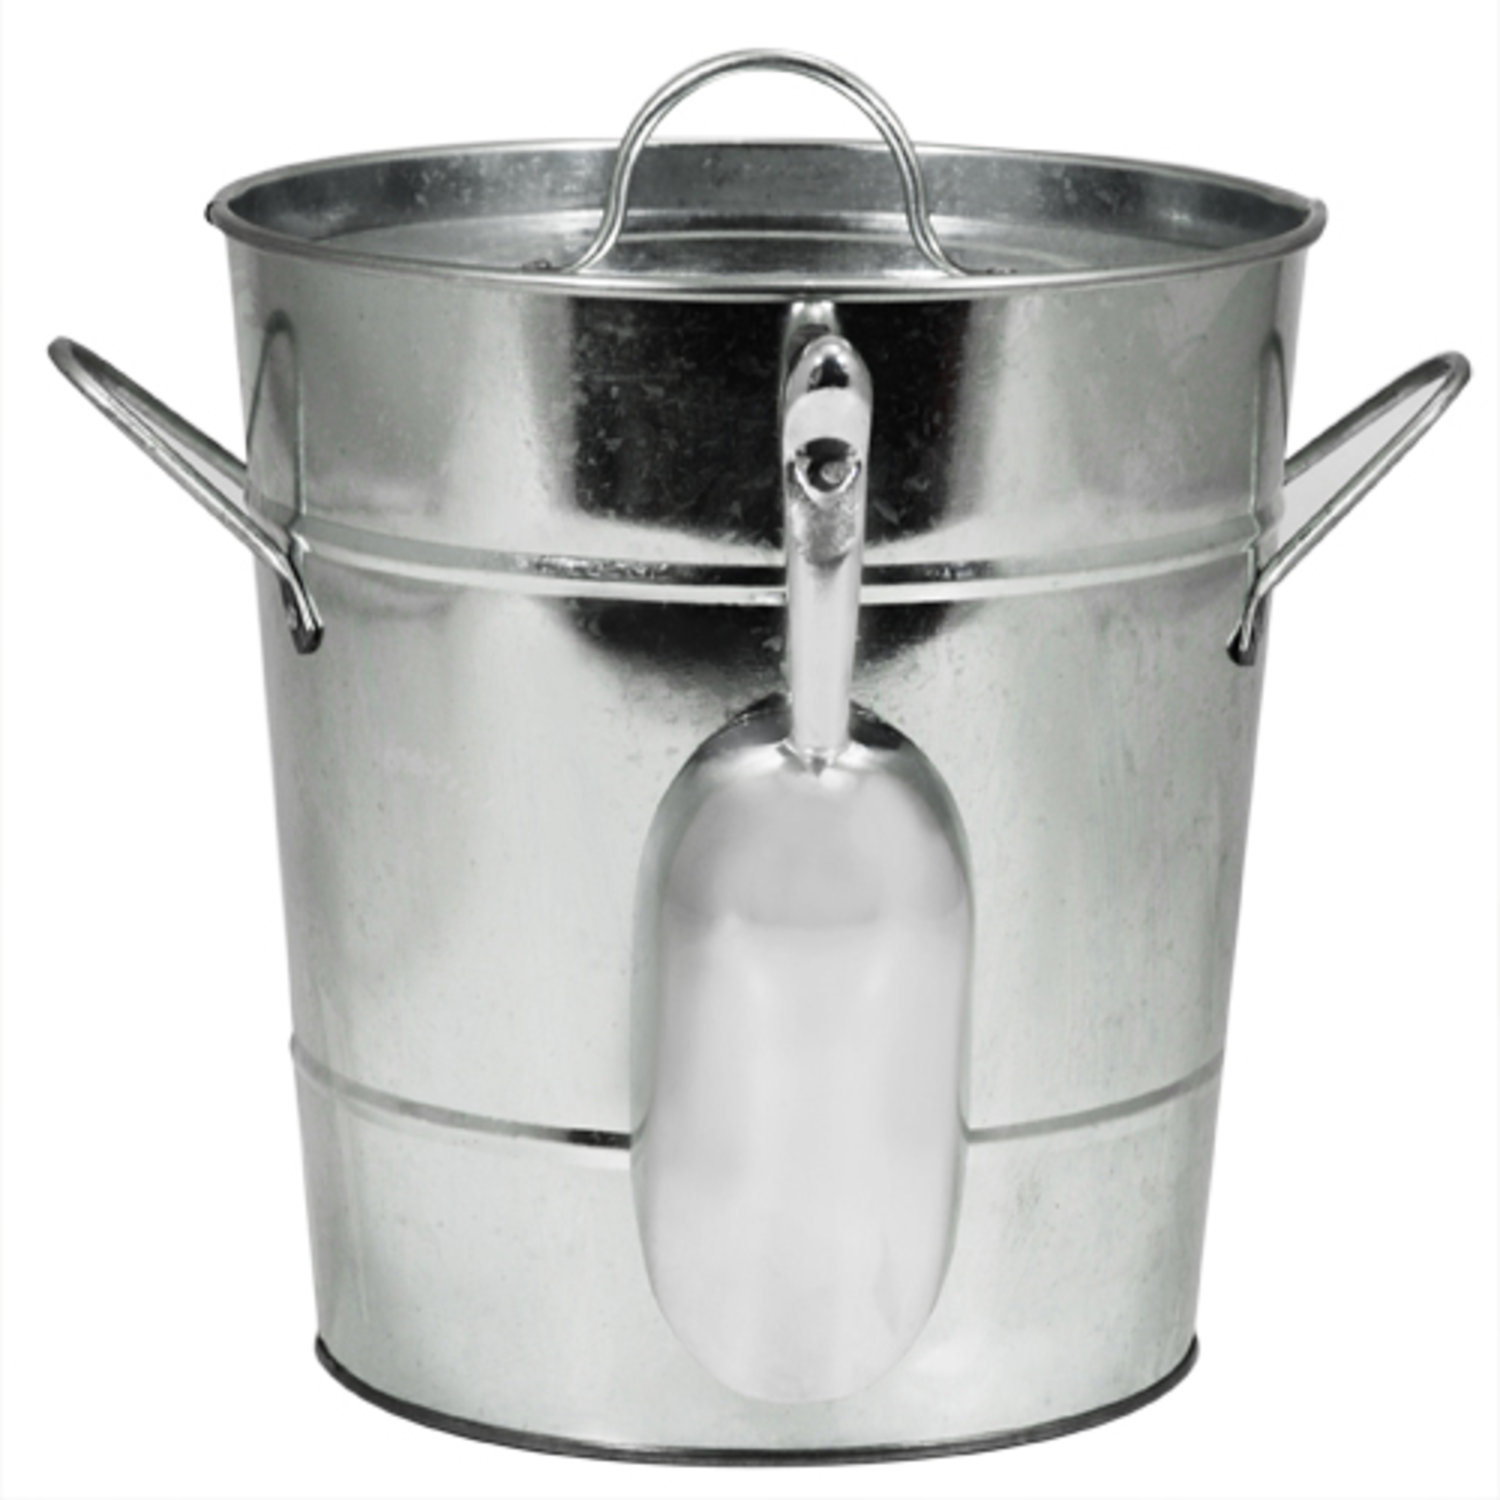 Galvanized Ice Bucket with Scoop and Lid - Whisk